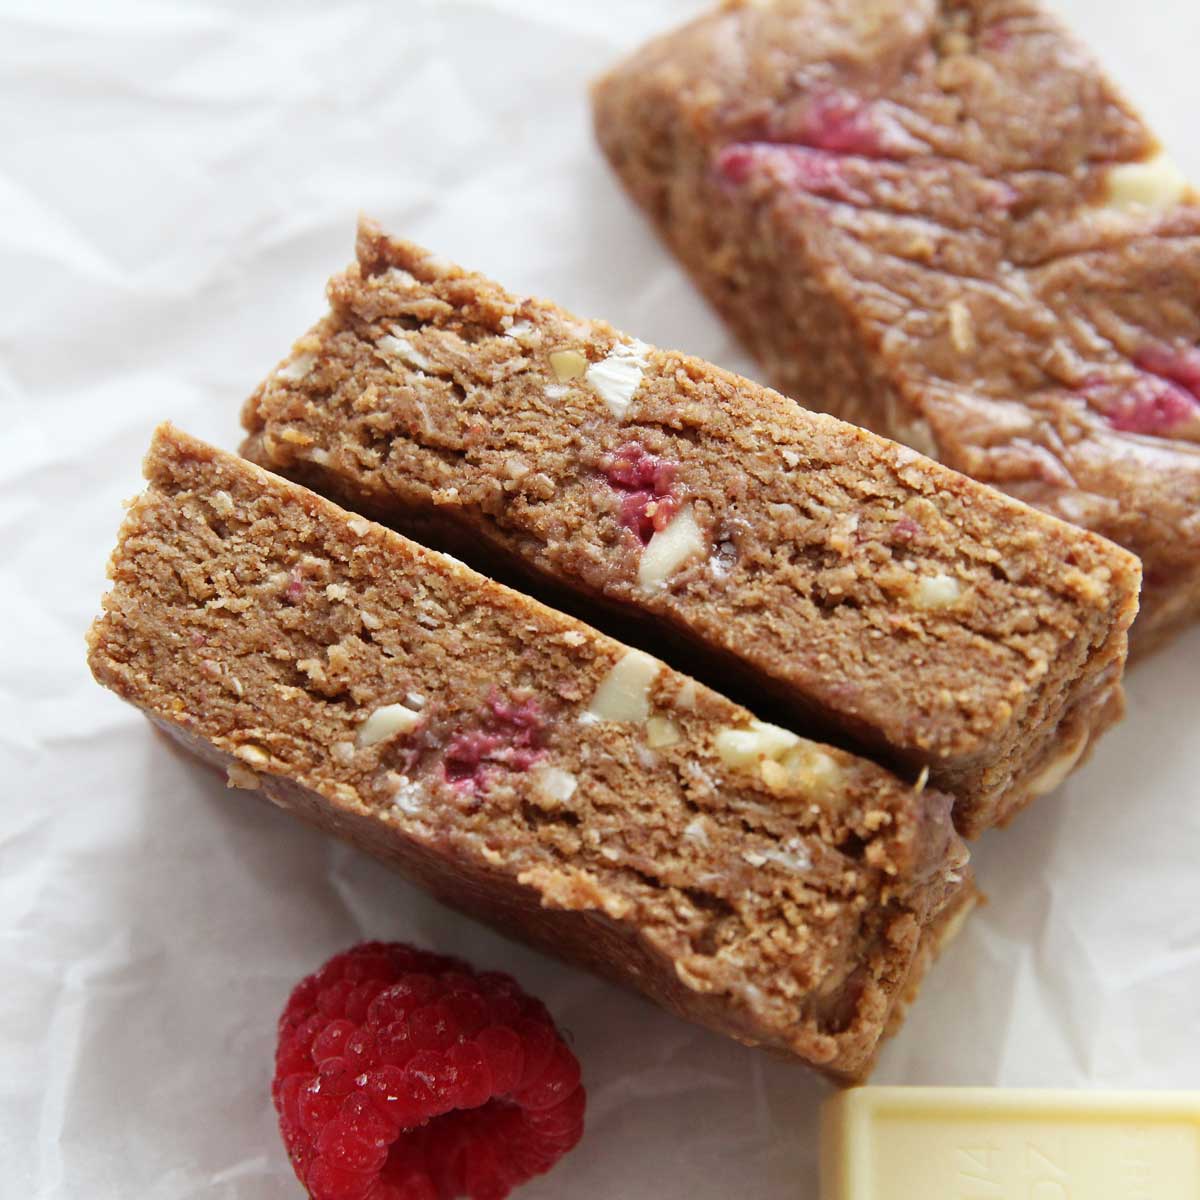 Healthy White Chocolate Raspberry Protein Bars Recipe (Tastes Like Quest Bars!) - PB Fit Protein Bars